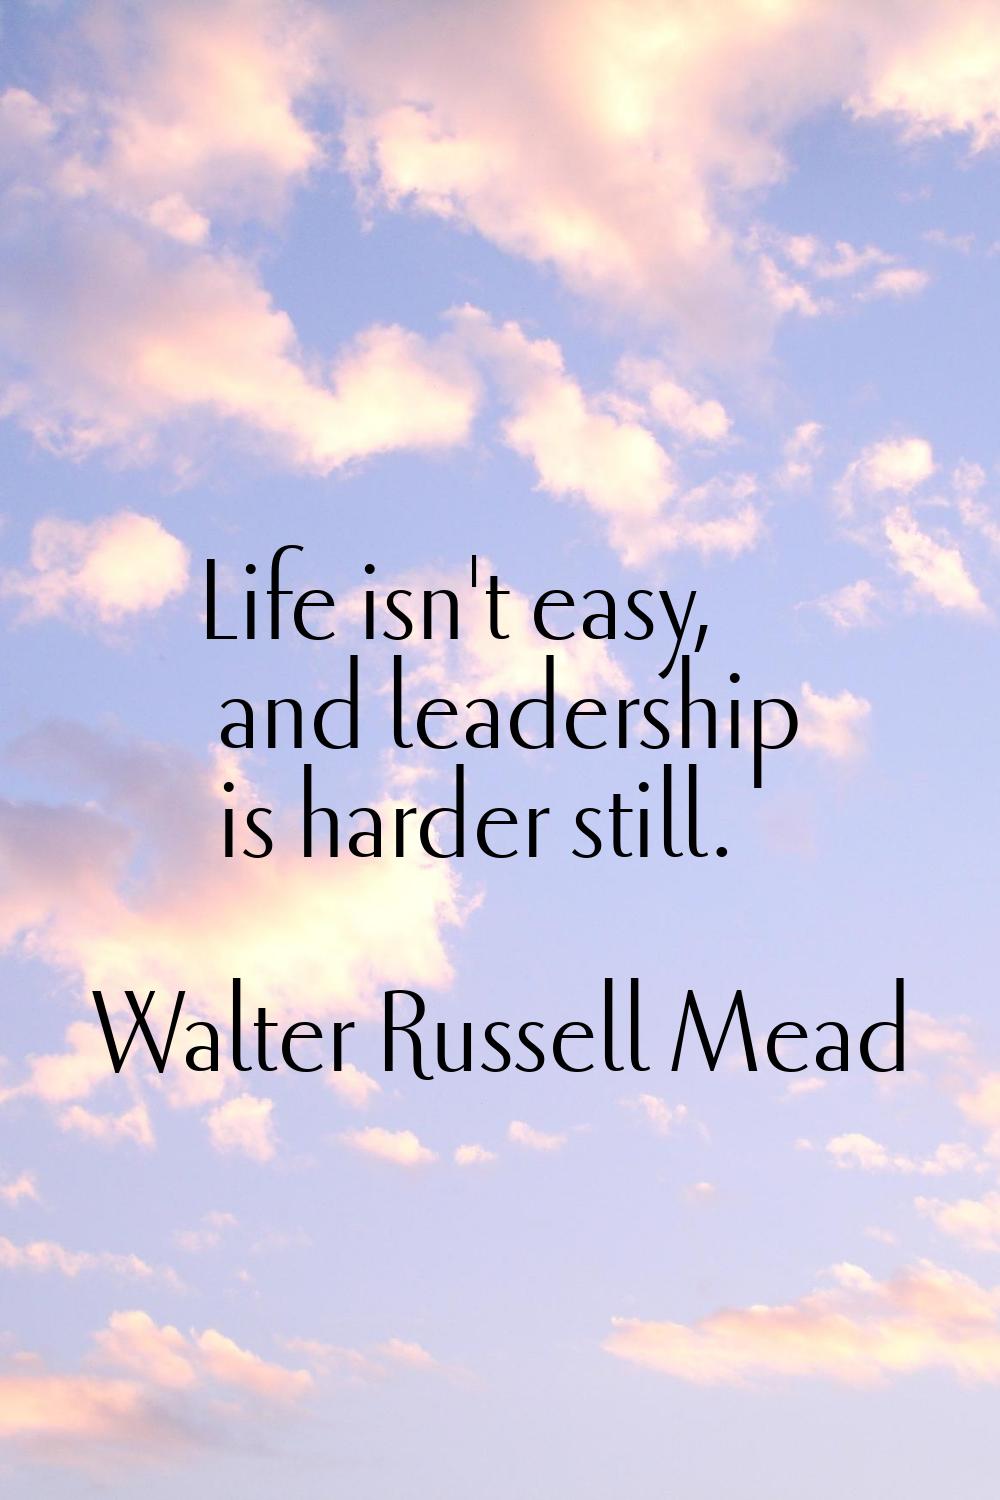 Life isn't easy, and leadership is harder still.